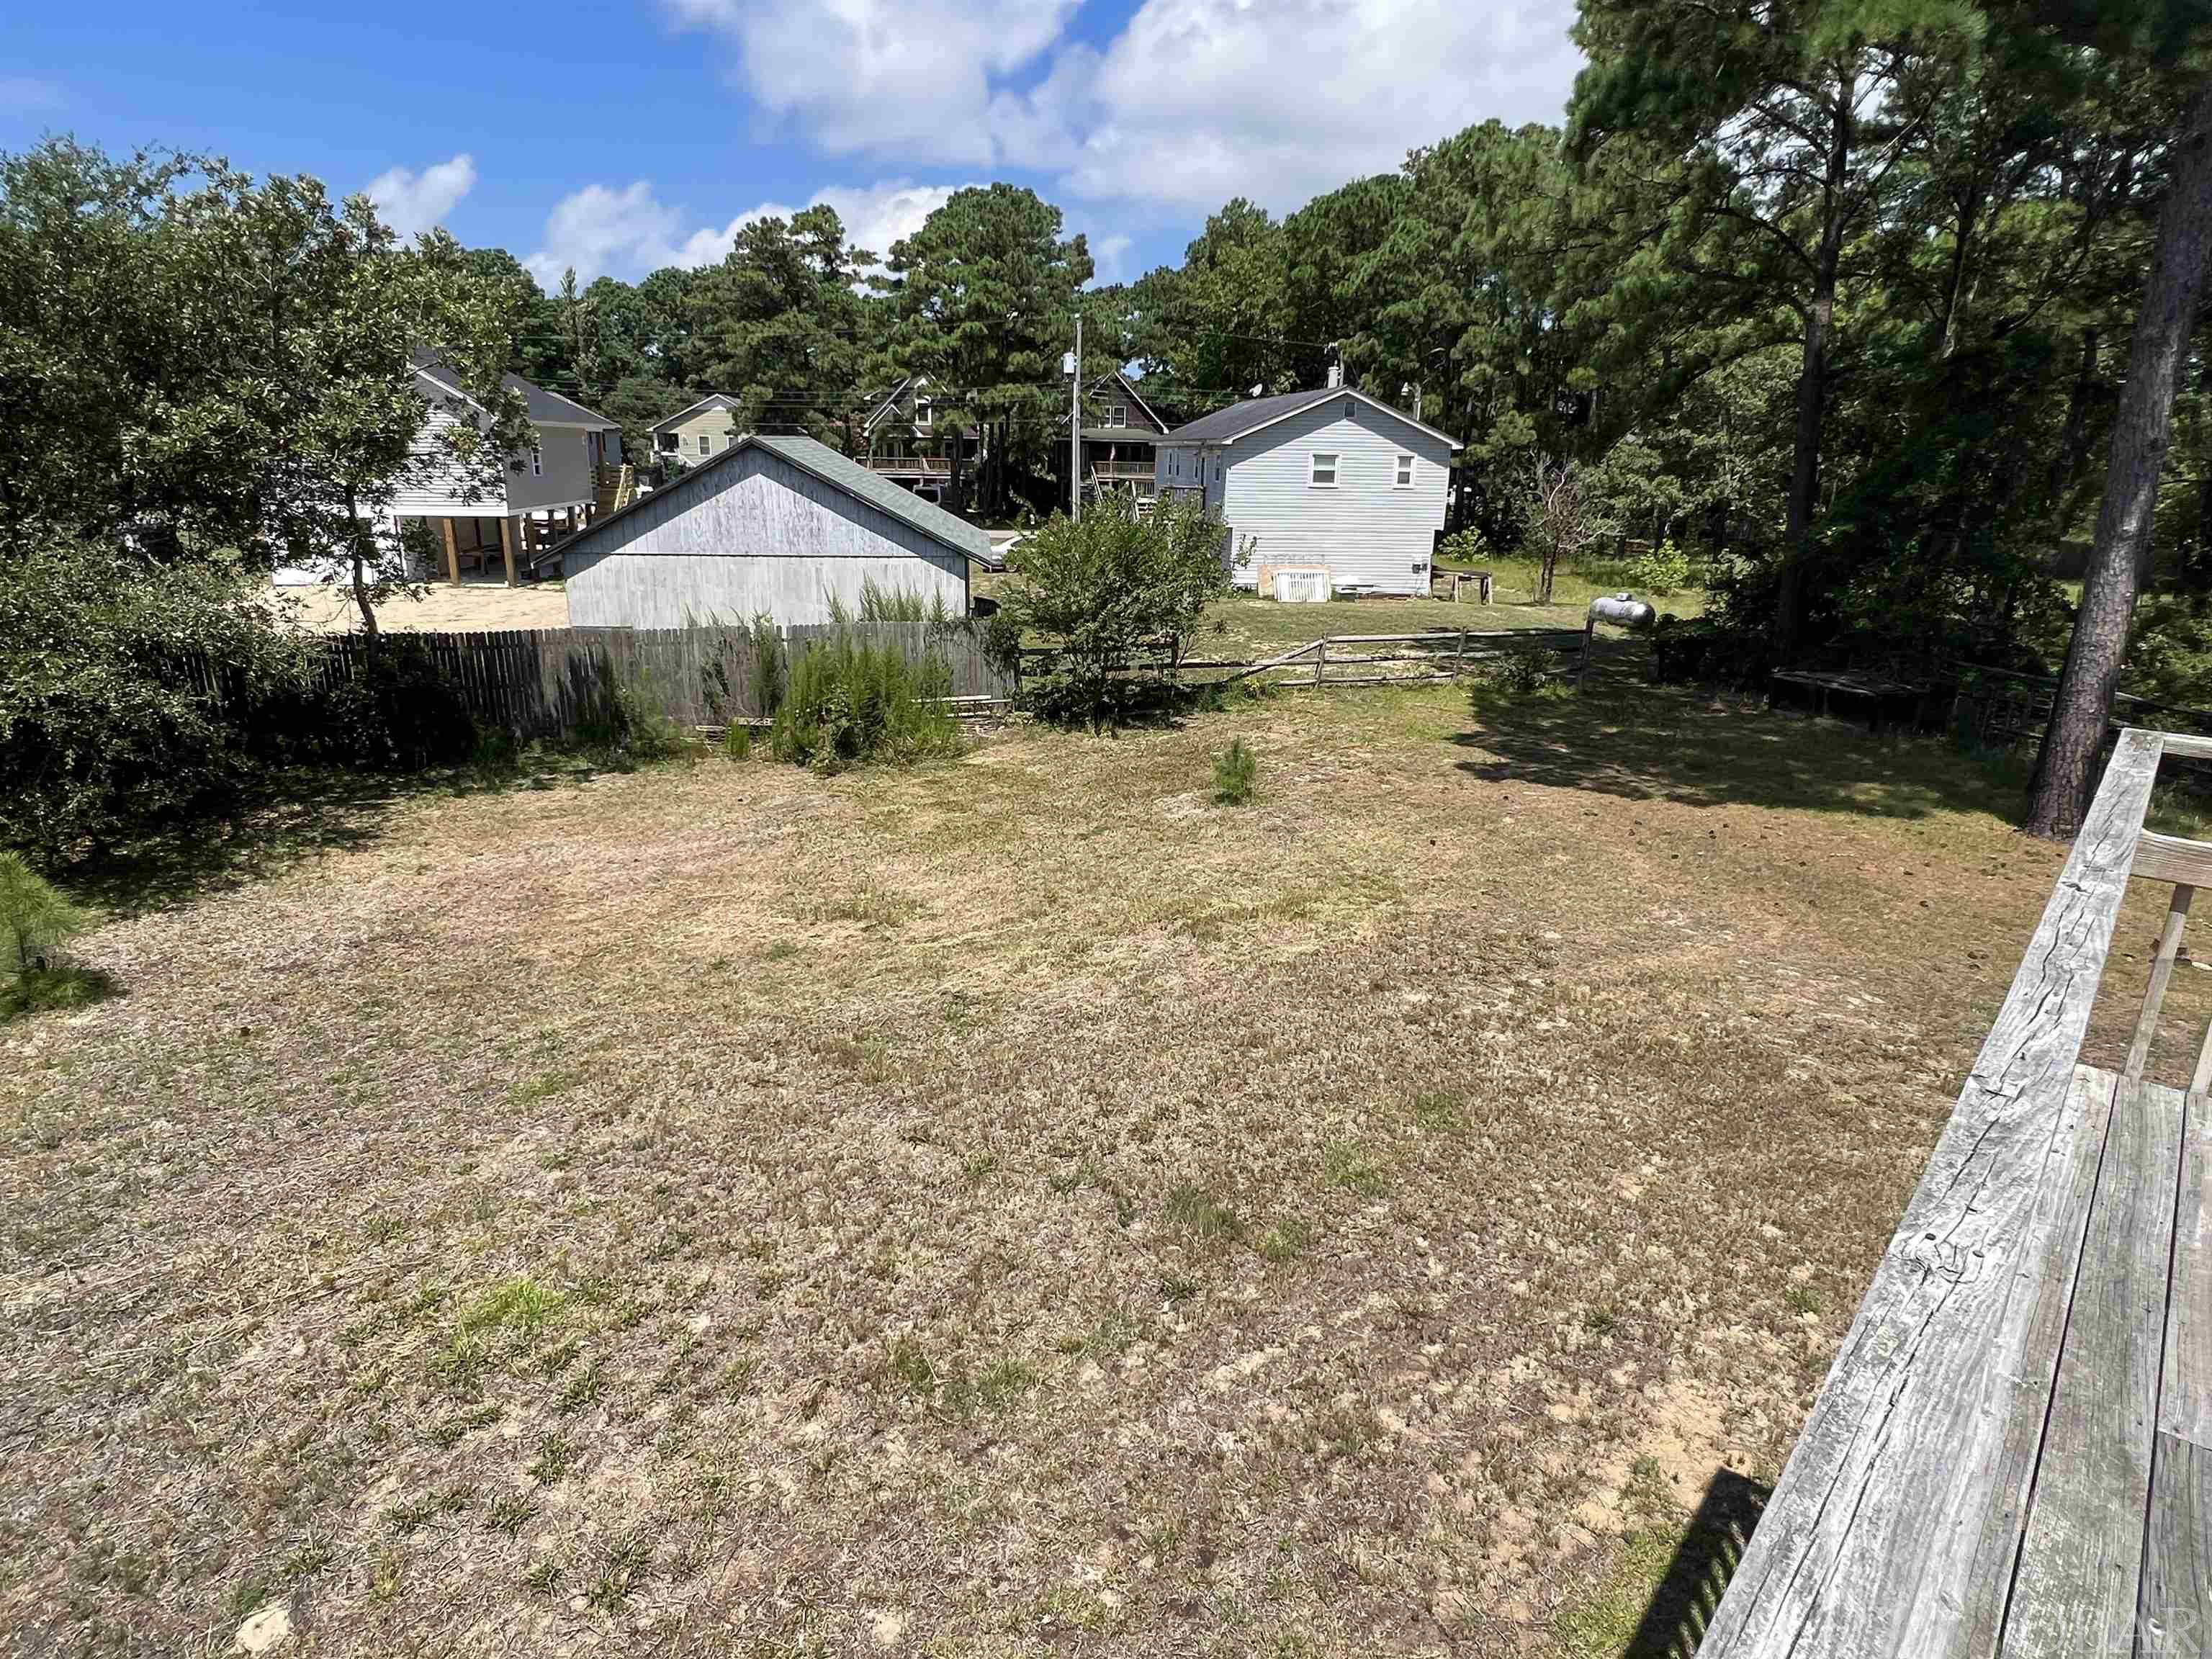 408 Pine Cone Court, Kill Devil Hills, NC 27948, 3 Bedrooms Bedrooms, ,2 BathroomsBathrooms,Residential,For sale,Pine Cone Court,123063